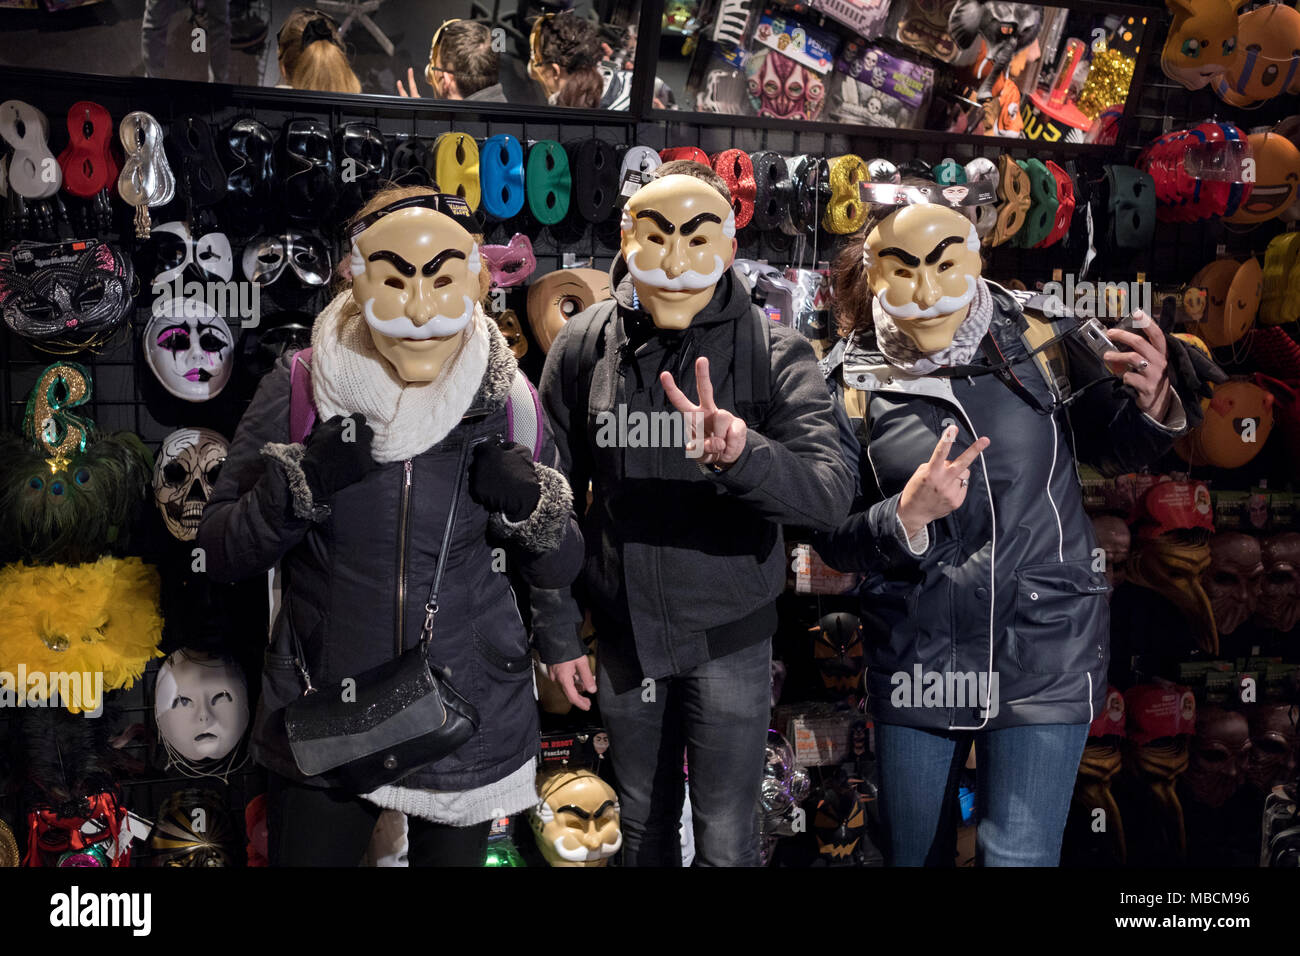 3 French tourists pose for a photo in the mask section of the Halloween Adventure costume store on Broadway in Greenwich Village. Stock Photo